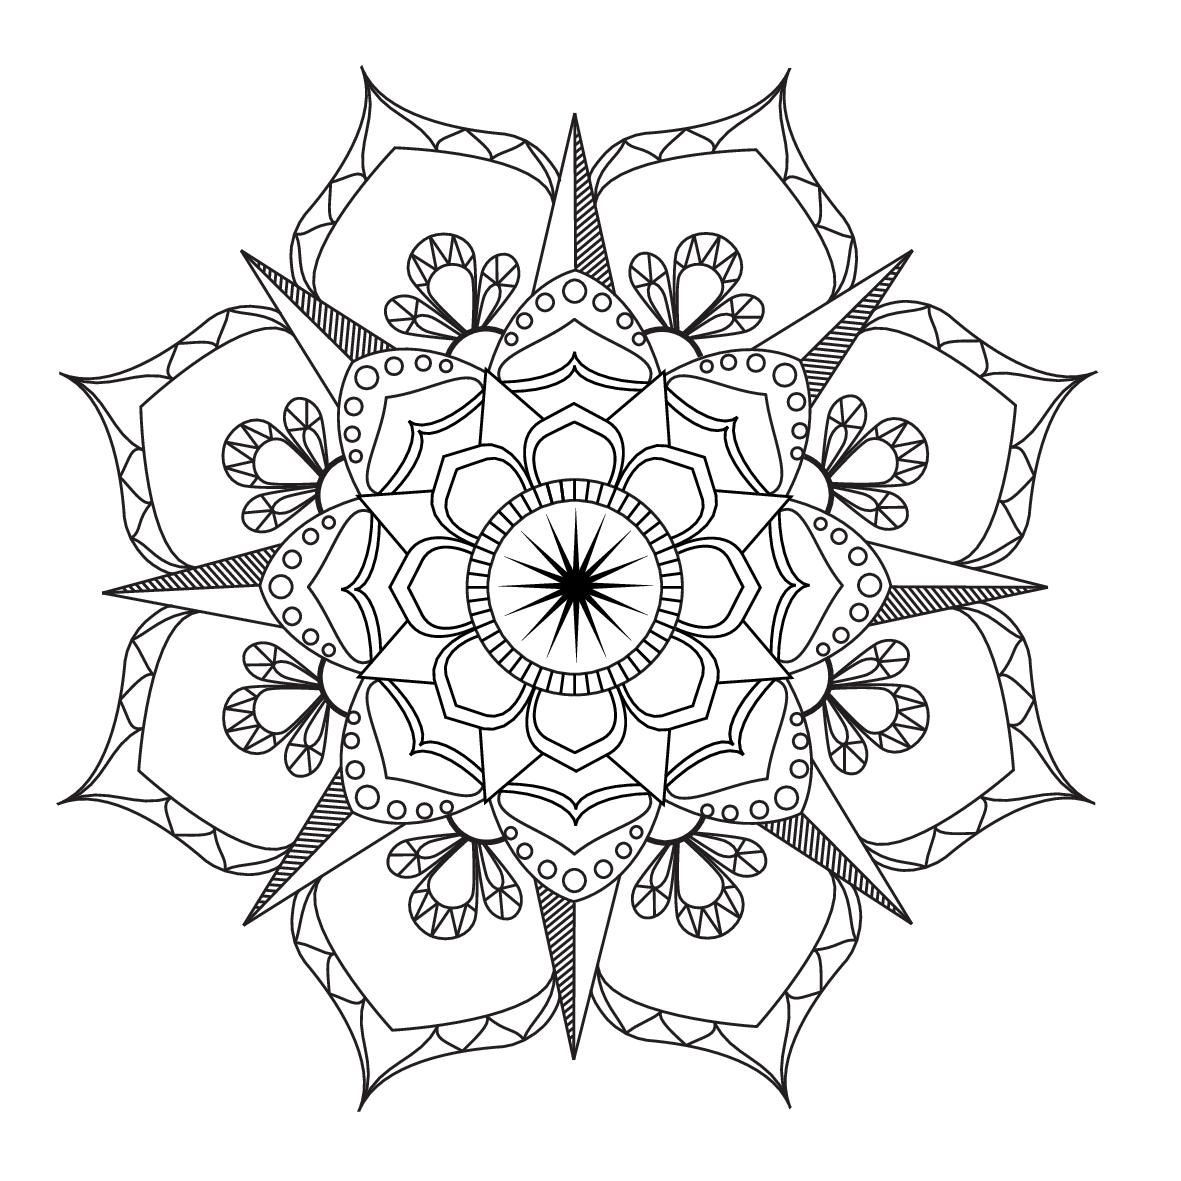 Flower Mandala-Coloring page-Adult coloring-art-therapy-pdf ...